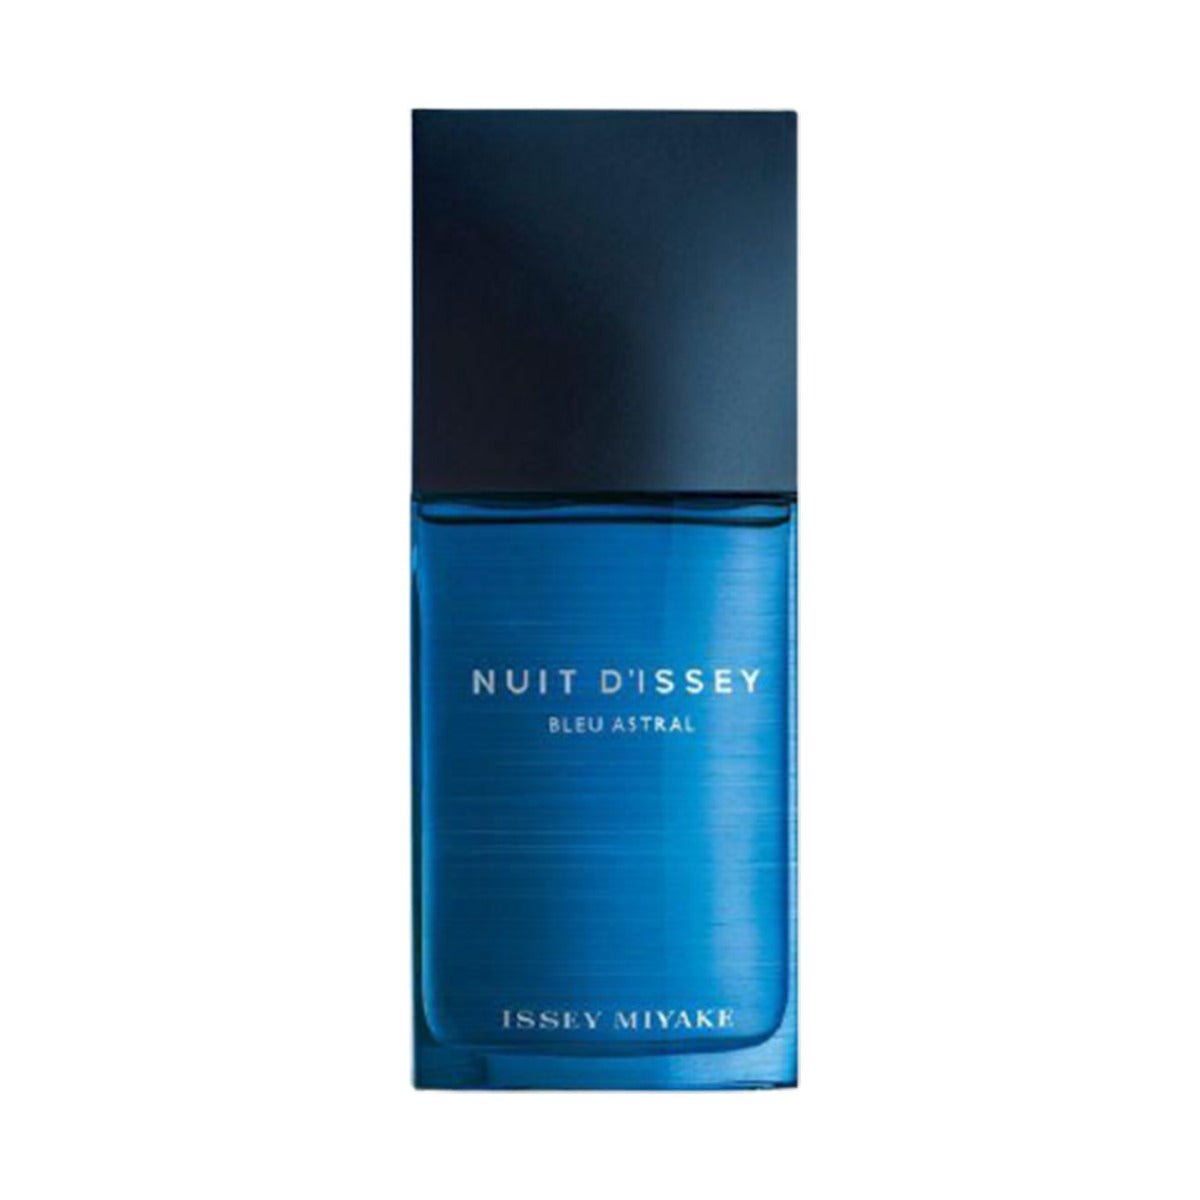 Issey Miyake Nuit D'Issey Blue Astral For Men Edt 125Ml - AllurebeautypkIssey Miyake Nuit D'Issey Blue Astral For Men Edt 125Ml